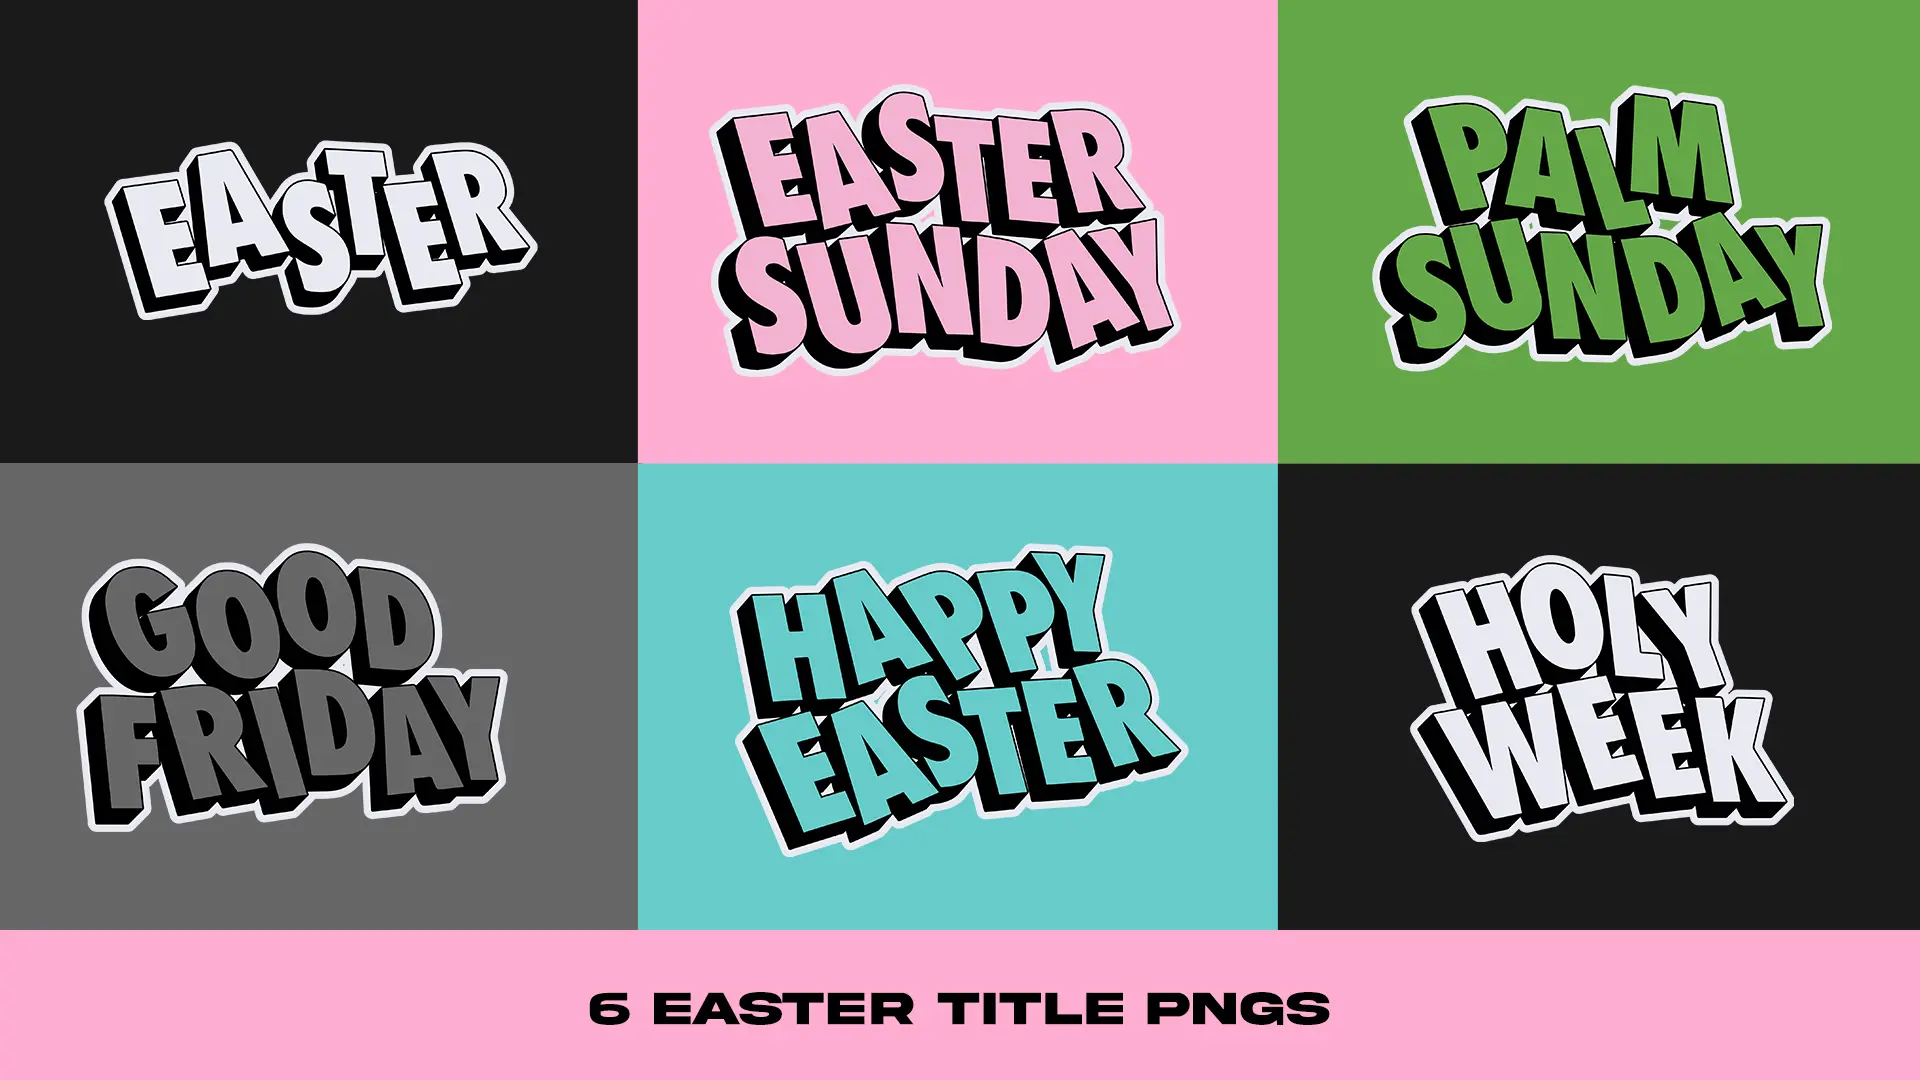 Celebrate The Easter Season With Flair Using Our 'Retro Easter Titles And Icons' Set. These Bold, Nostalgic Graphics Are Perfect For Adding A Spirited Touch To Your Church Media During This Joyful Time.